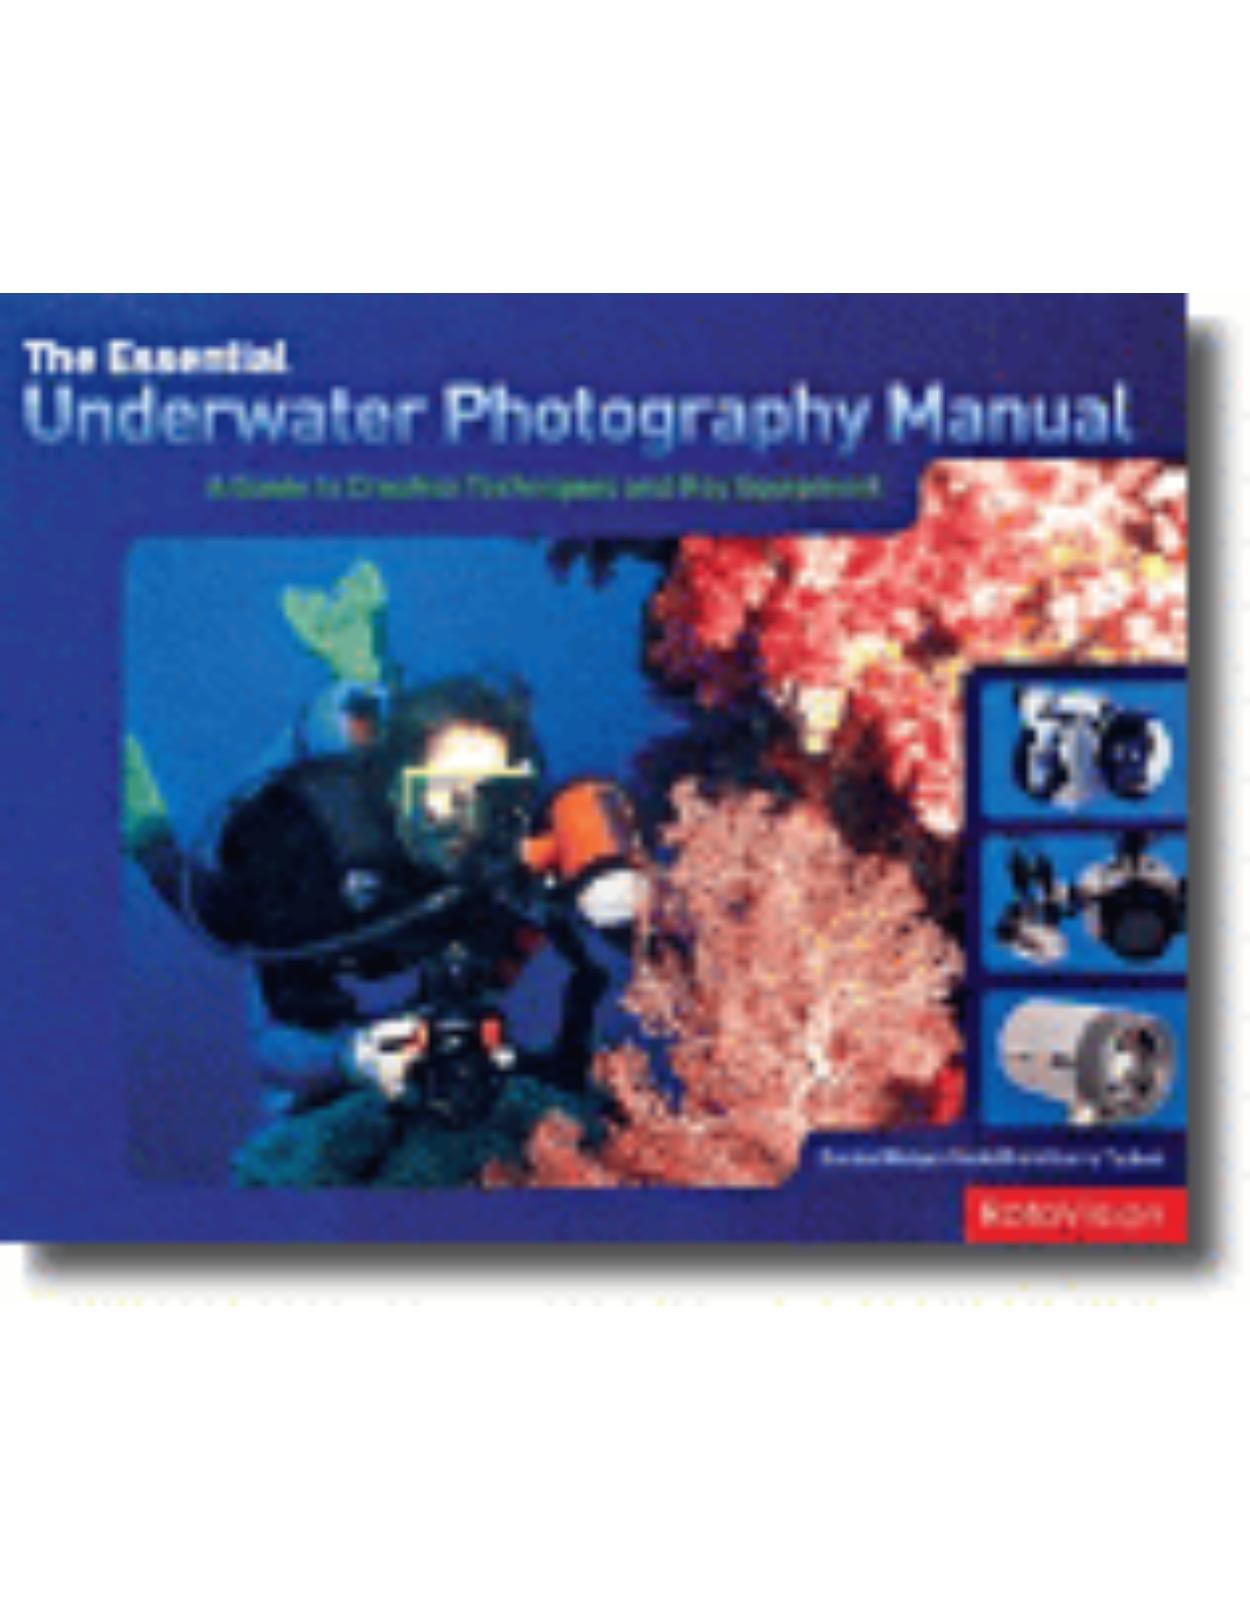 The Essential Underwater Photography Manual